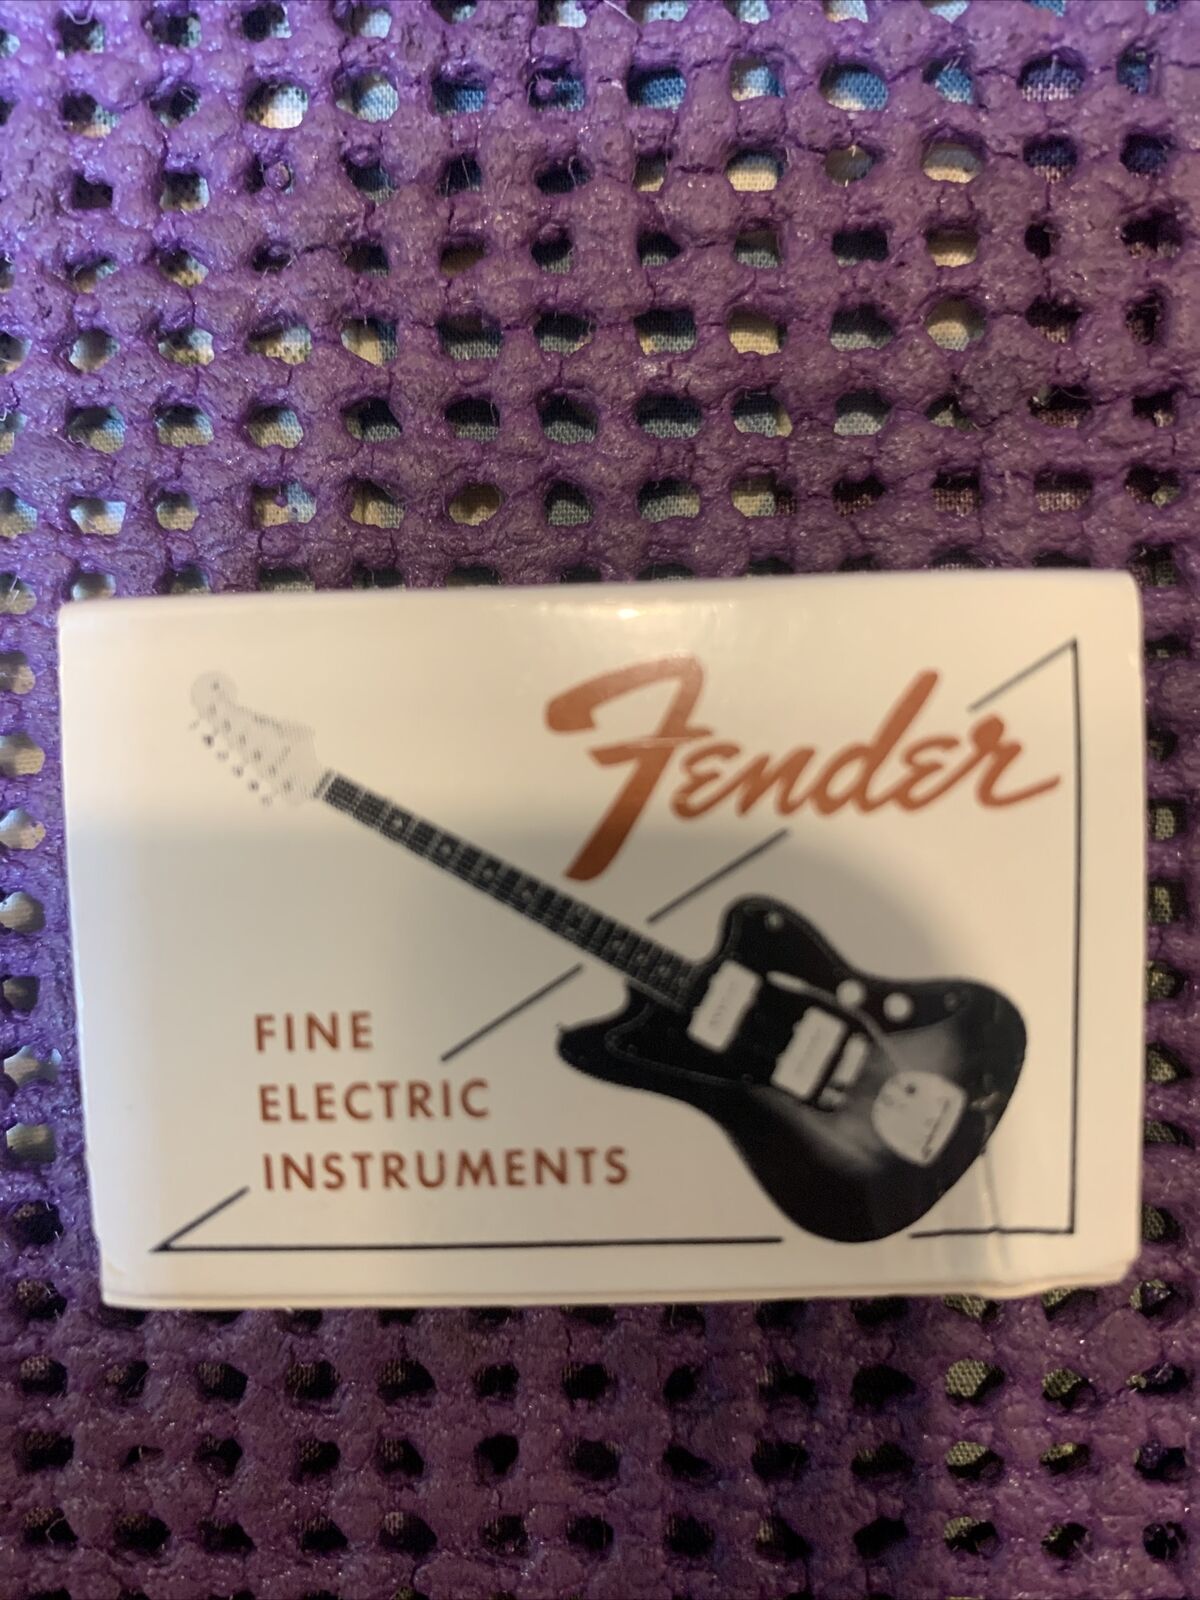 Vintage Fender Matchbox RARE Guitars Amplifiers Collectible.   Unused W/ Matches